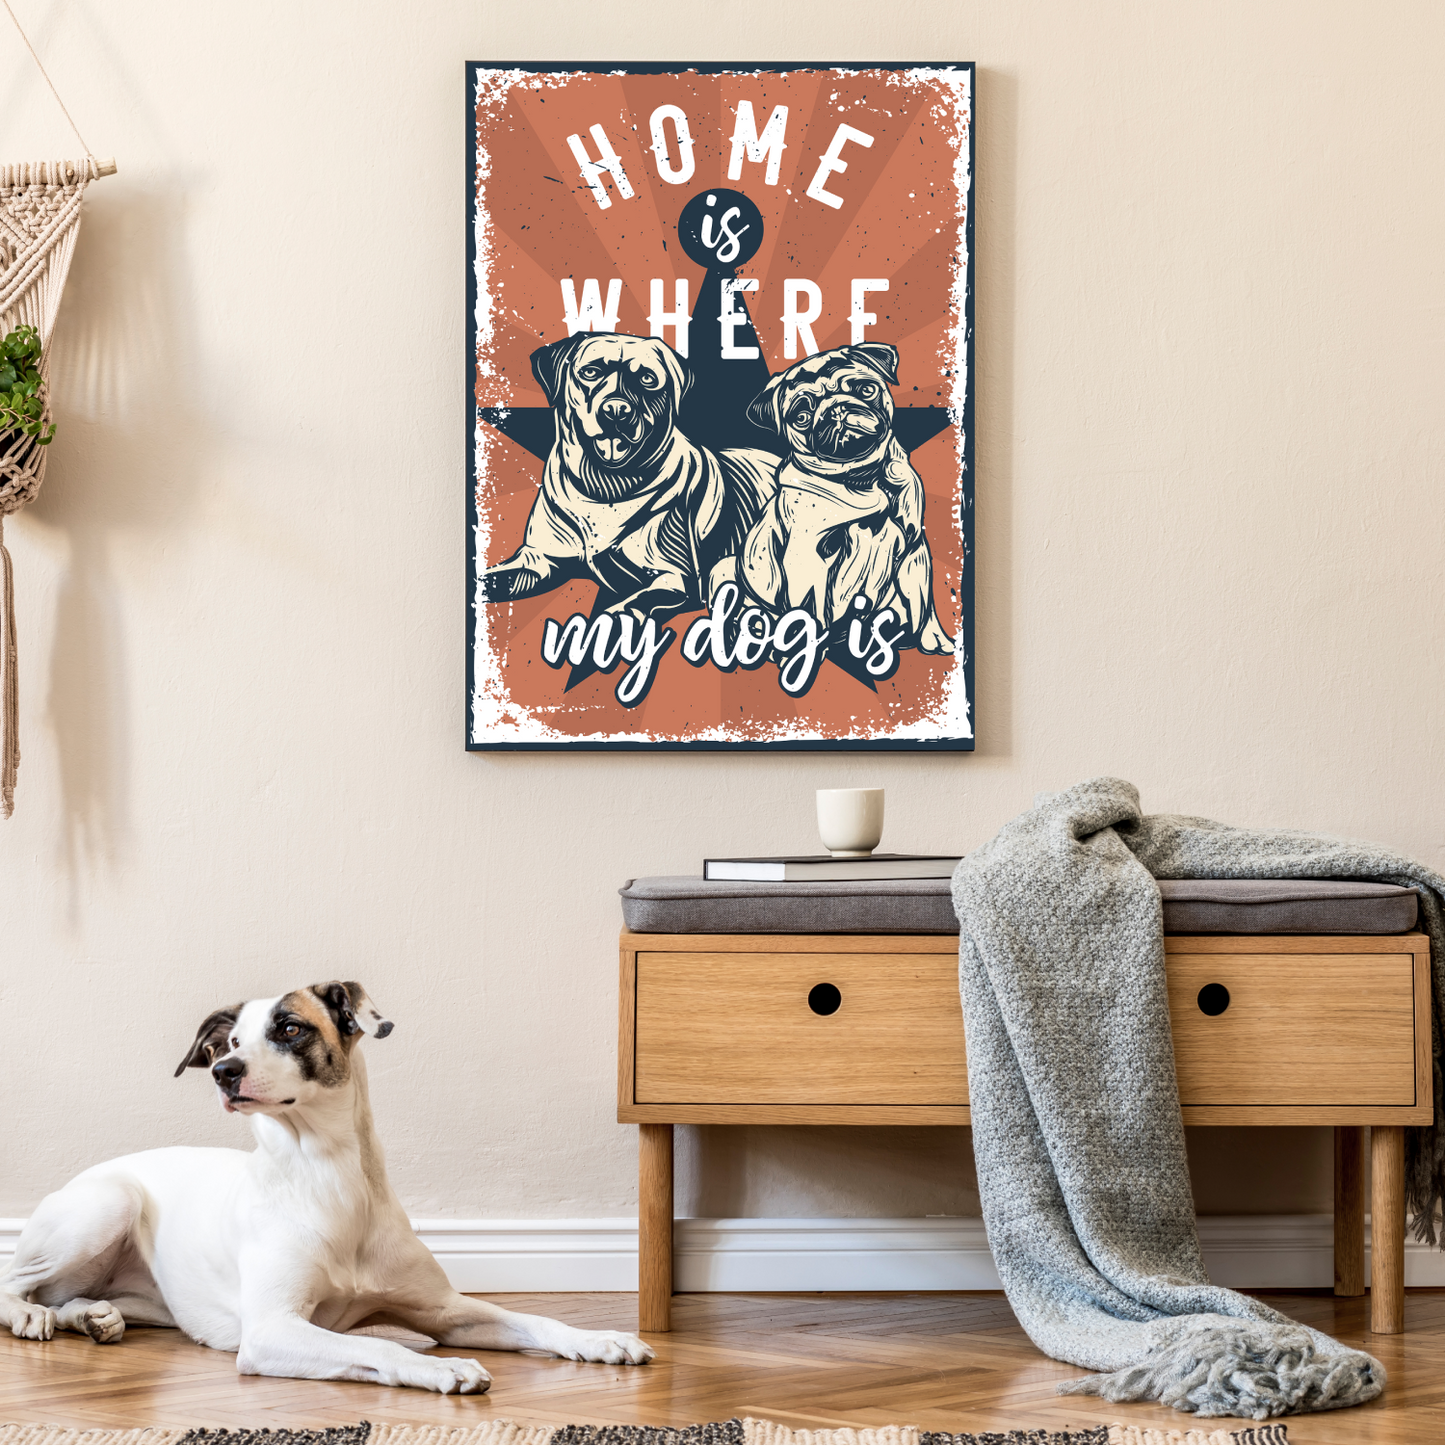 Home Is Where The Dog Is Wood Print Wall Art Painting